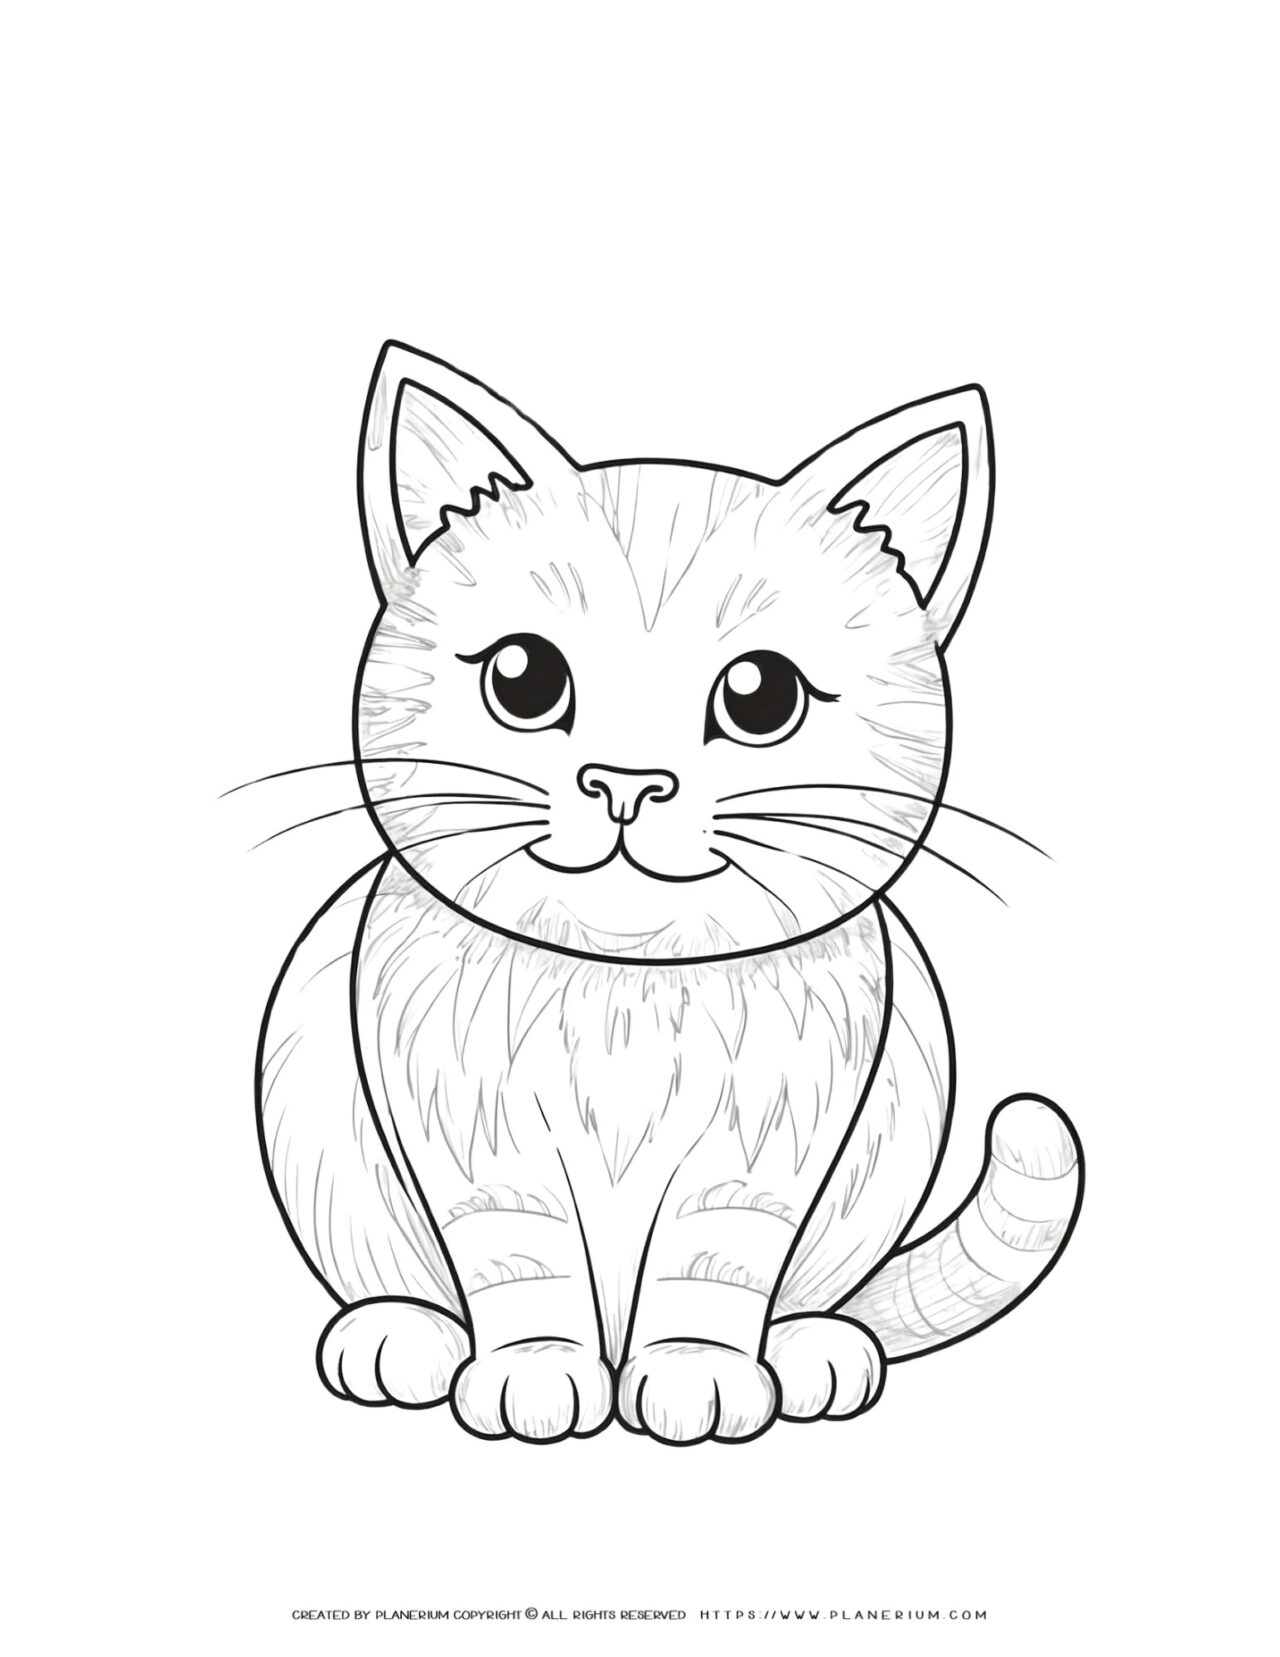 Cute-Kitten-Sitting-Drawing-Coloring-Page